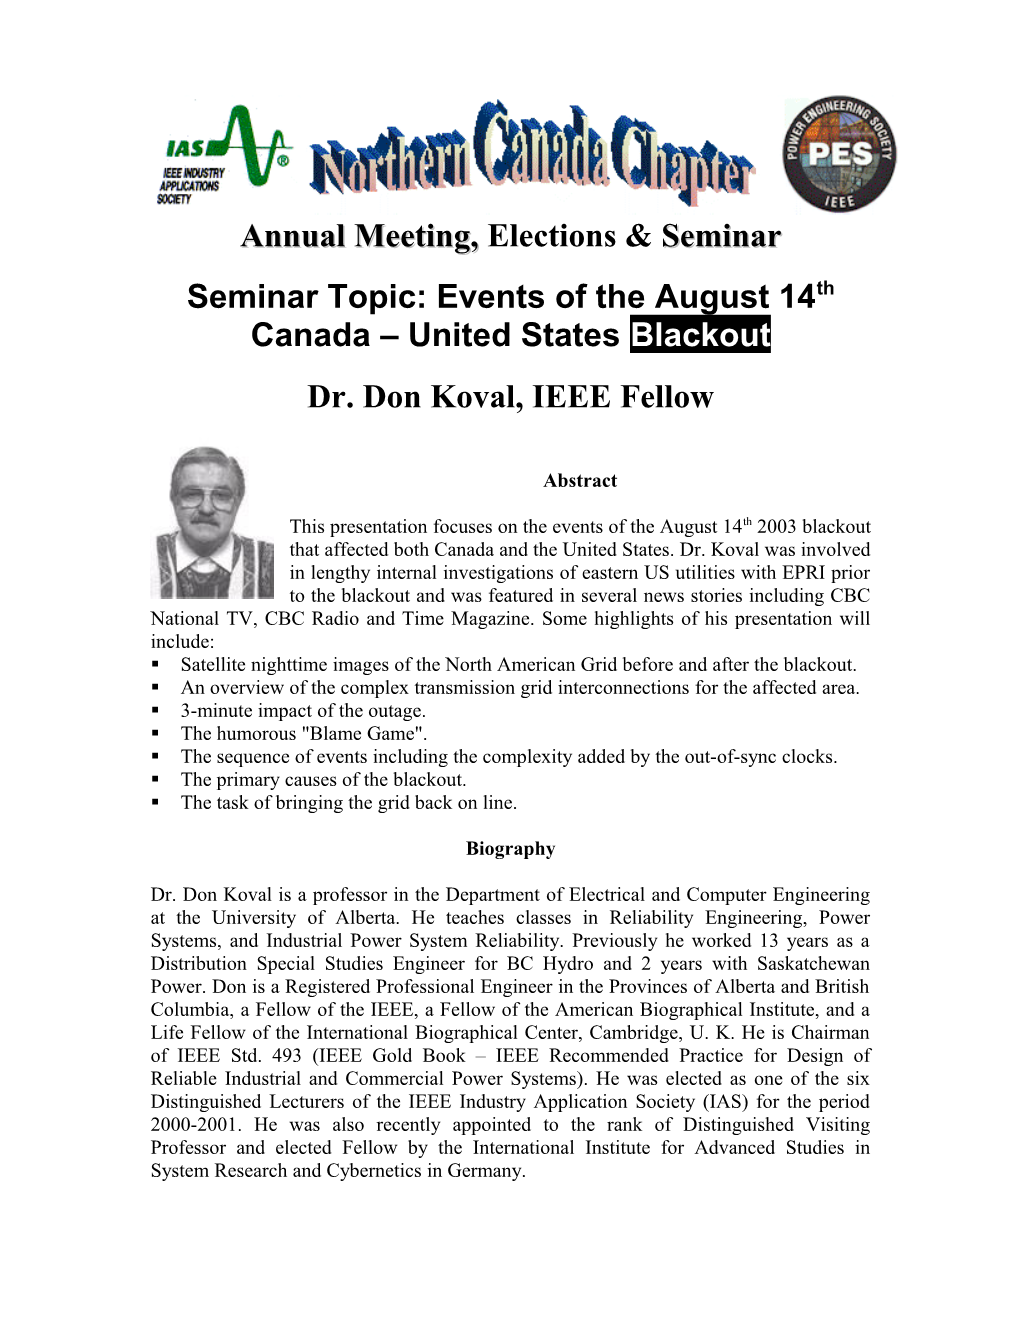 Seminar Topic: Events of the August 14Th Canada United States Blackout